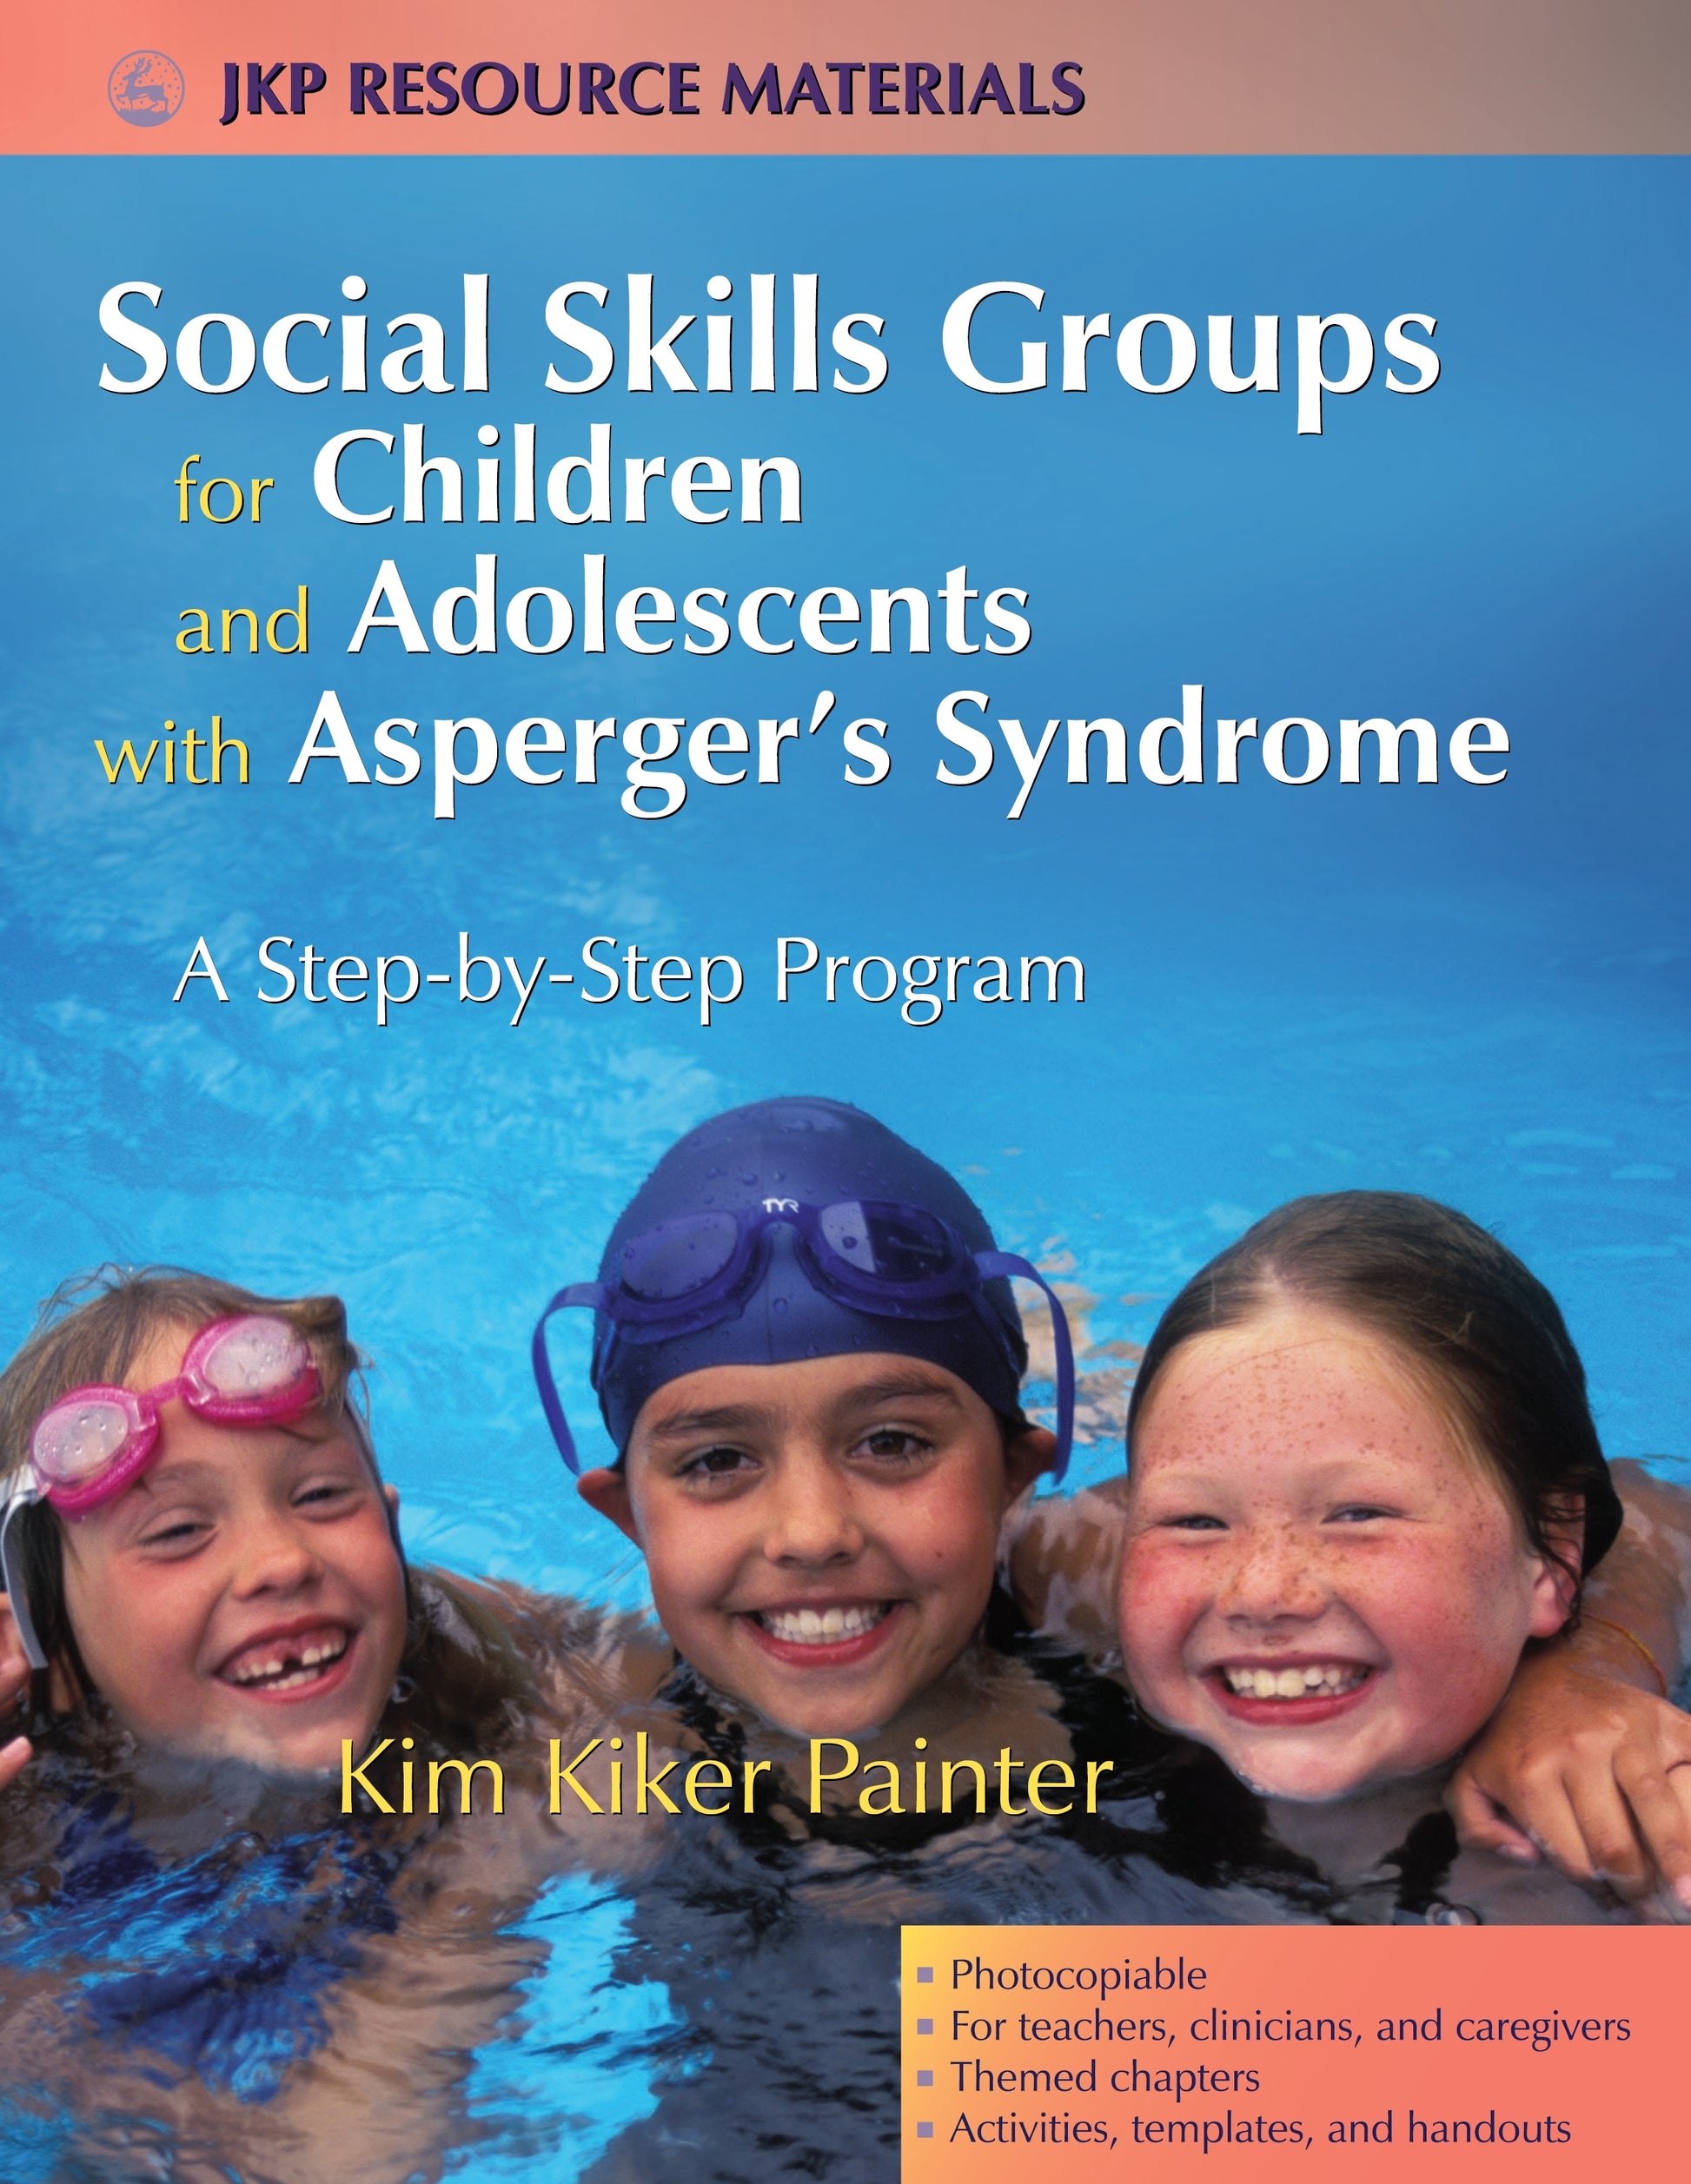 Social Skills Groups for Children and Adolescents with Asperger's Syndrome by Kim Kiker Painter